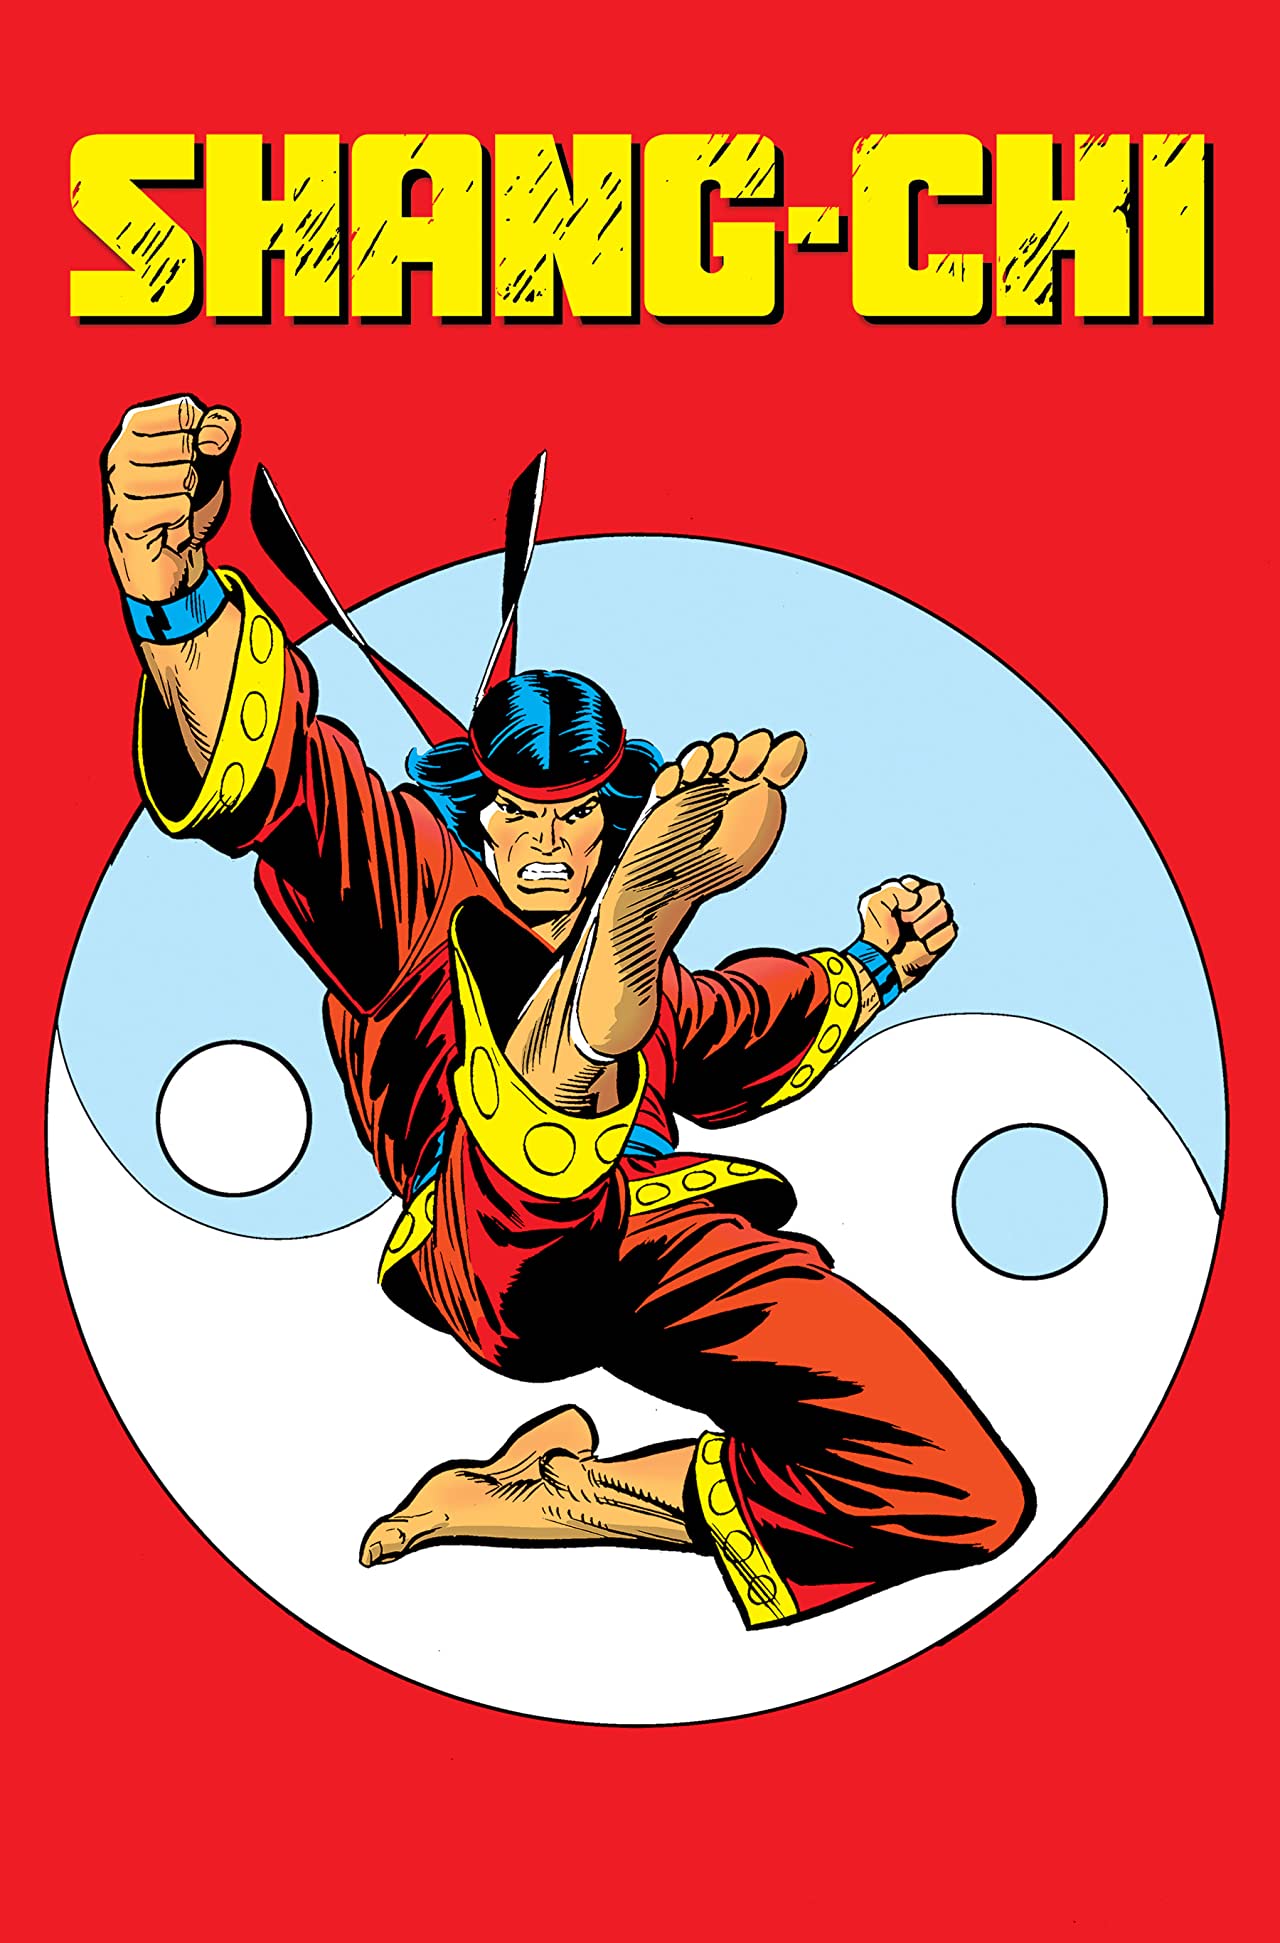 Shang-Chi: Earth's Mightiest Martial Artist (Trade Paperback)